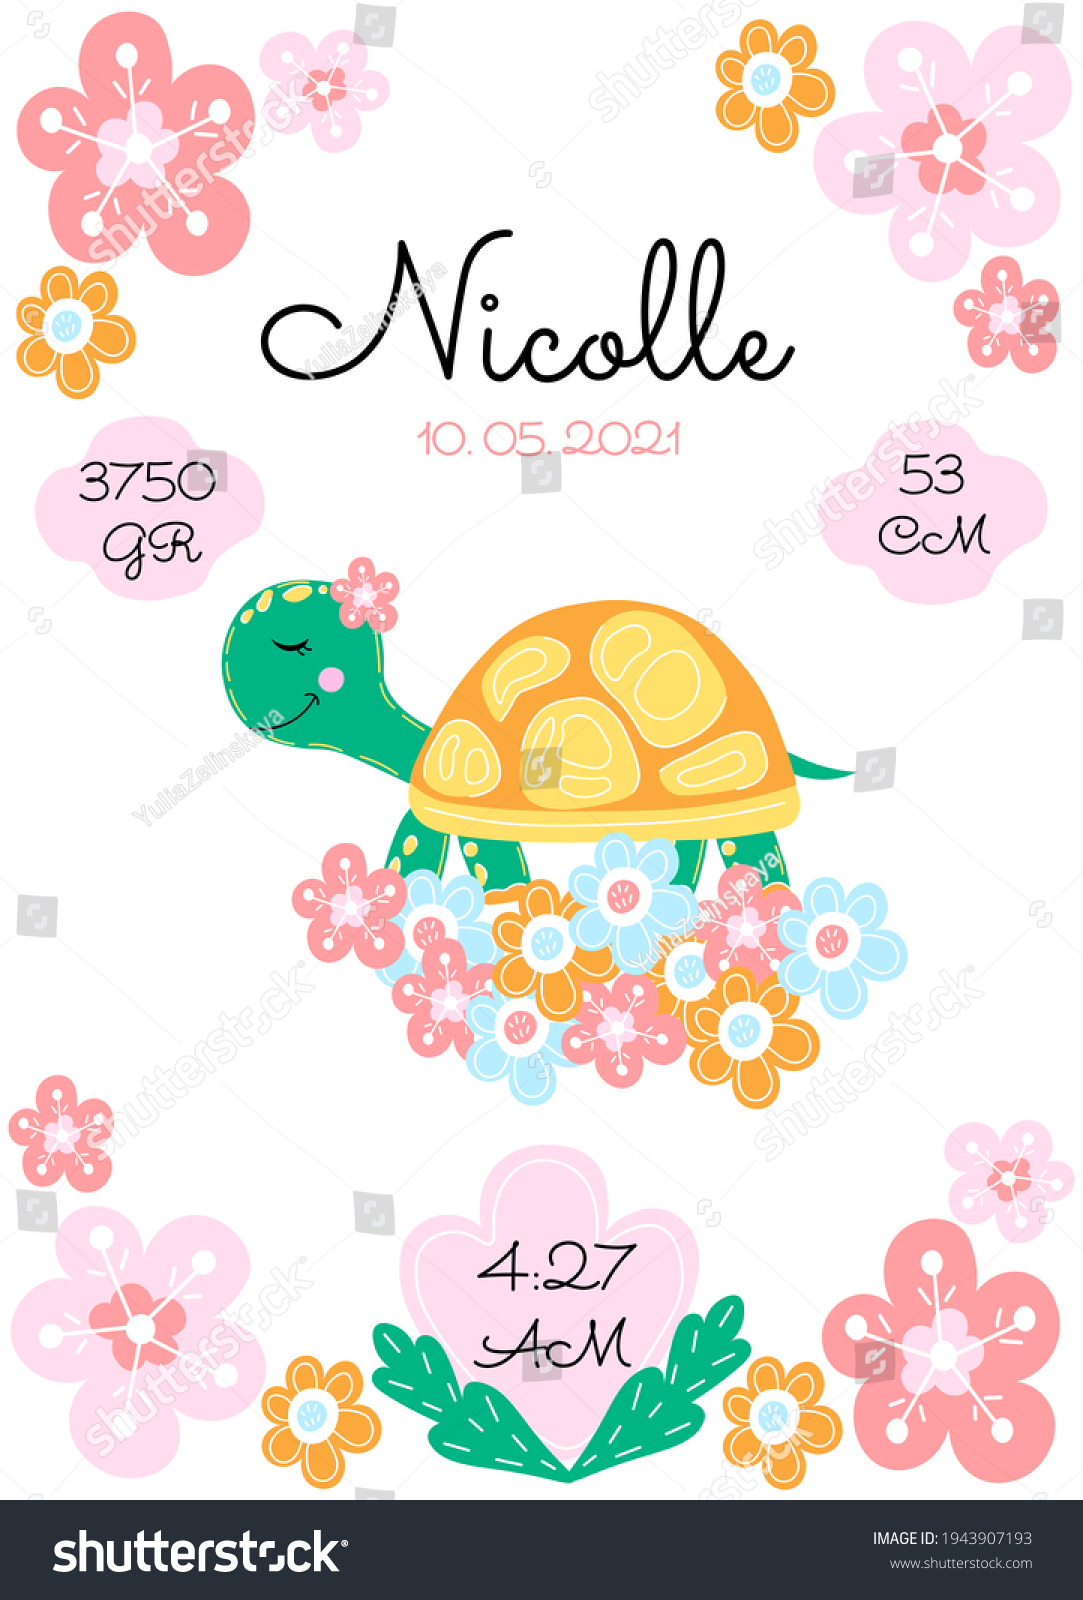 SVG of Personalize newborn baby metric poster with cute turtle and flowers on a white background. Date, cm, gr, time svg